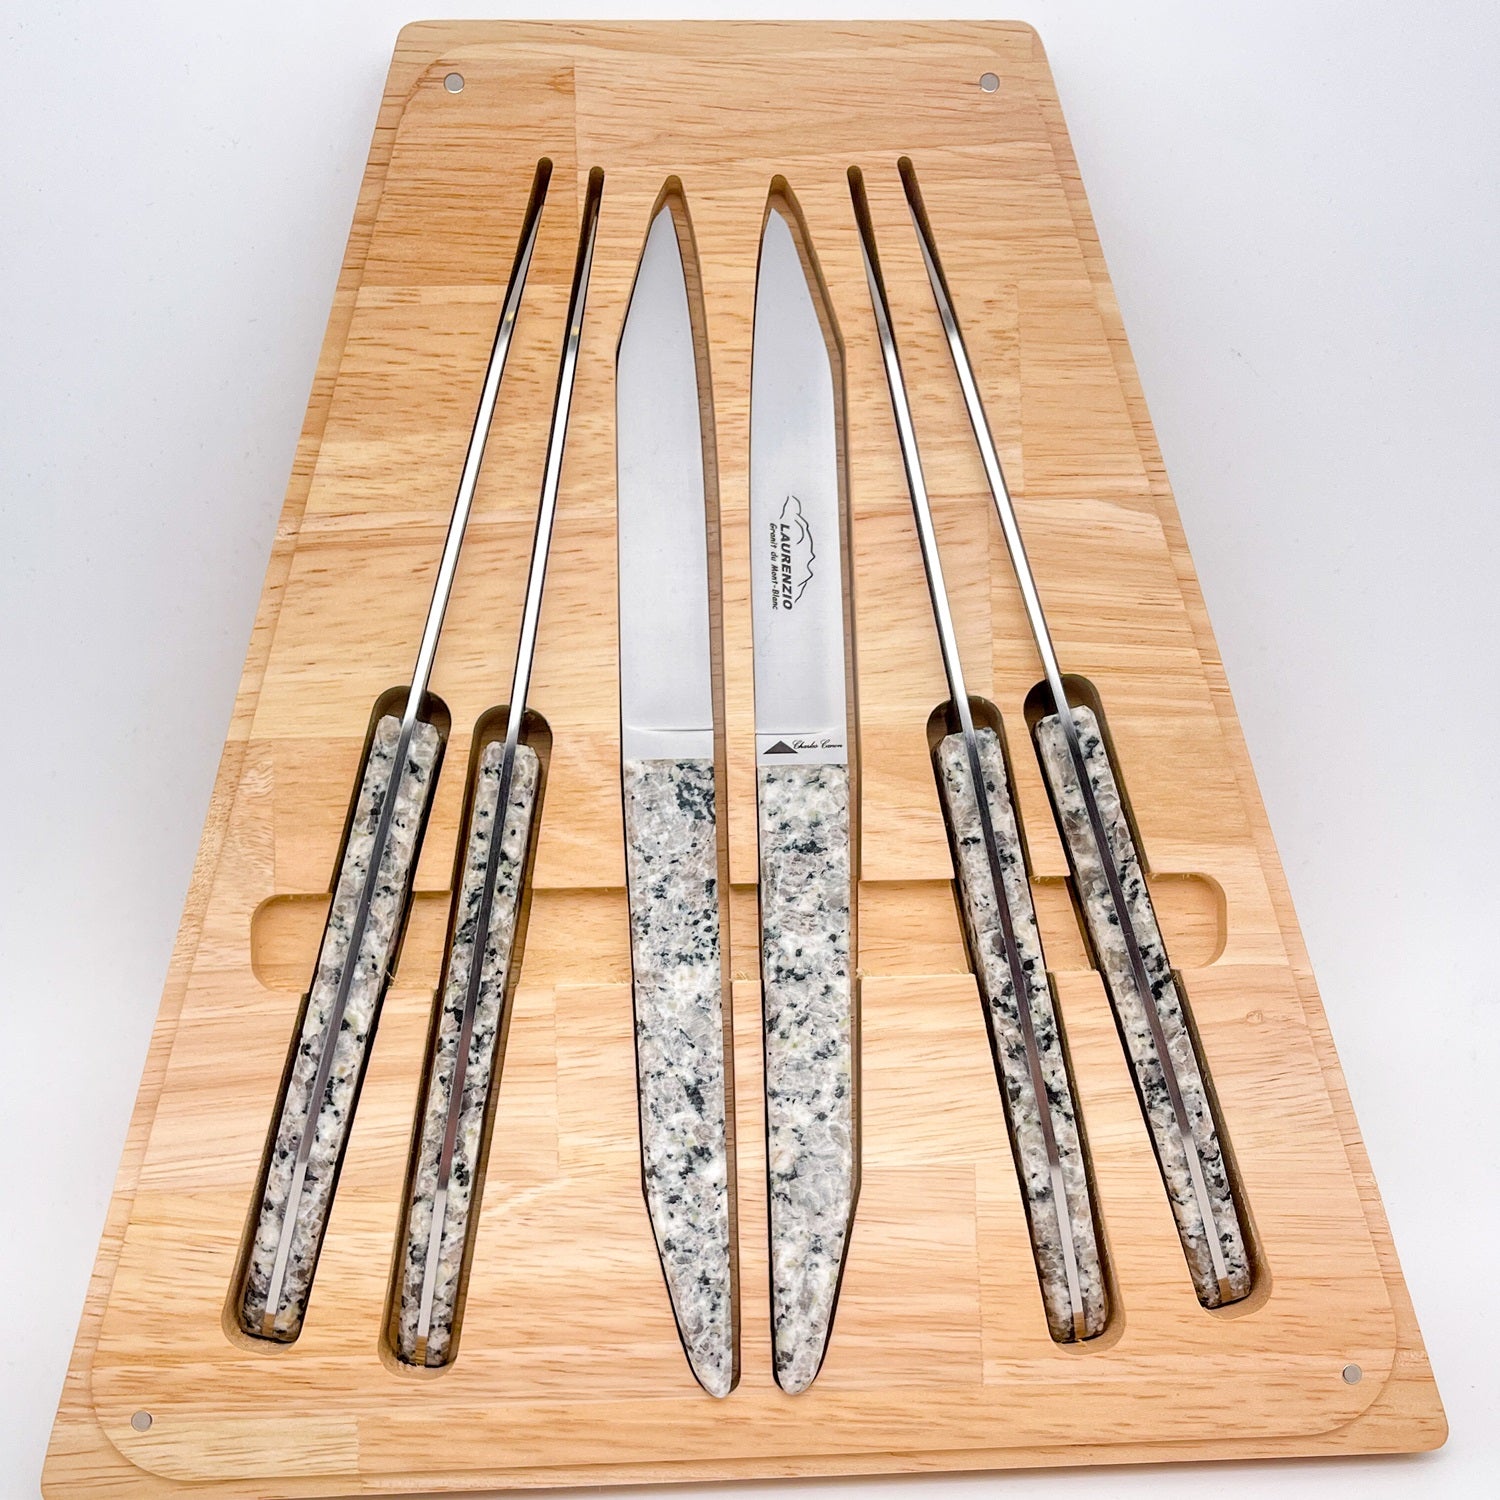 6 table knives with a Mont Blanc granite handle